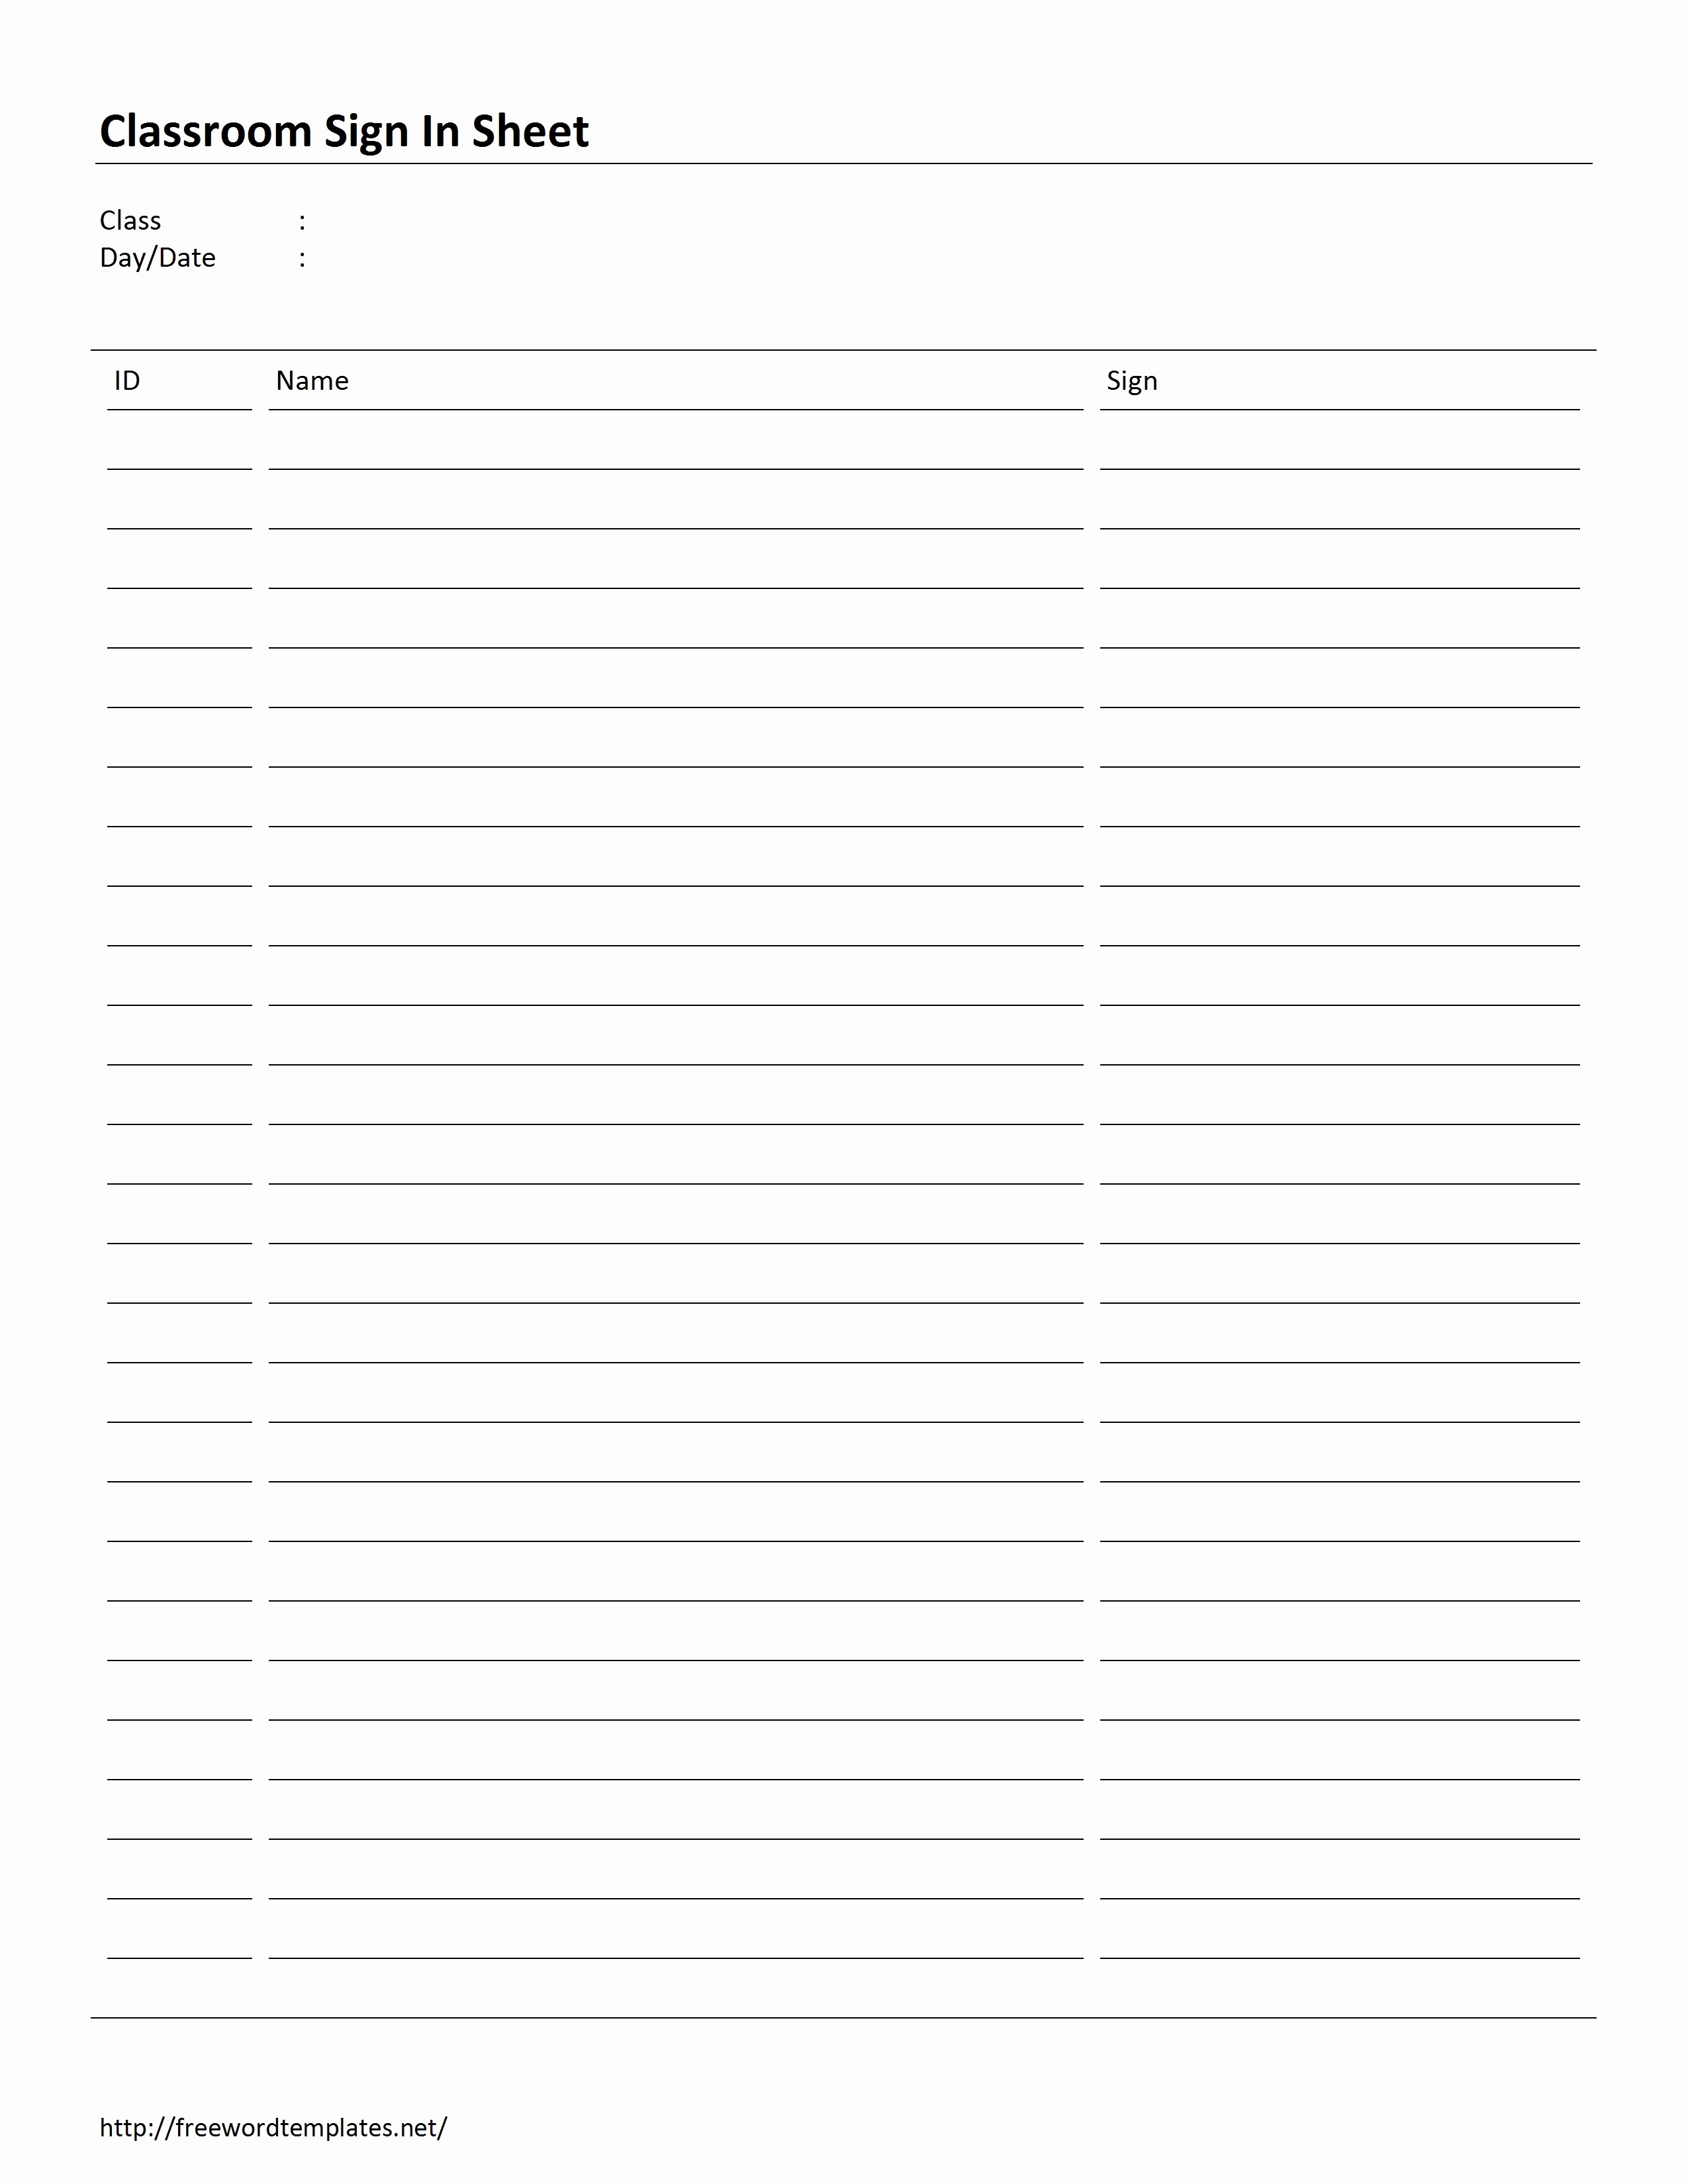 Sign In Sheet Template Free Best Of Sign In Sheet Template Free